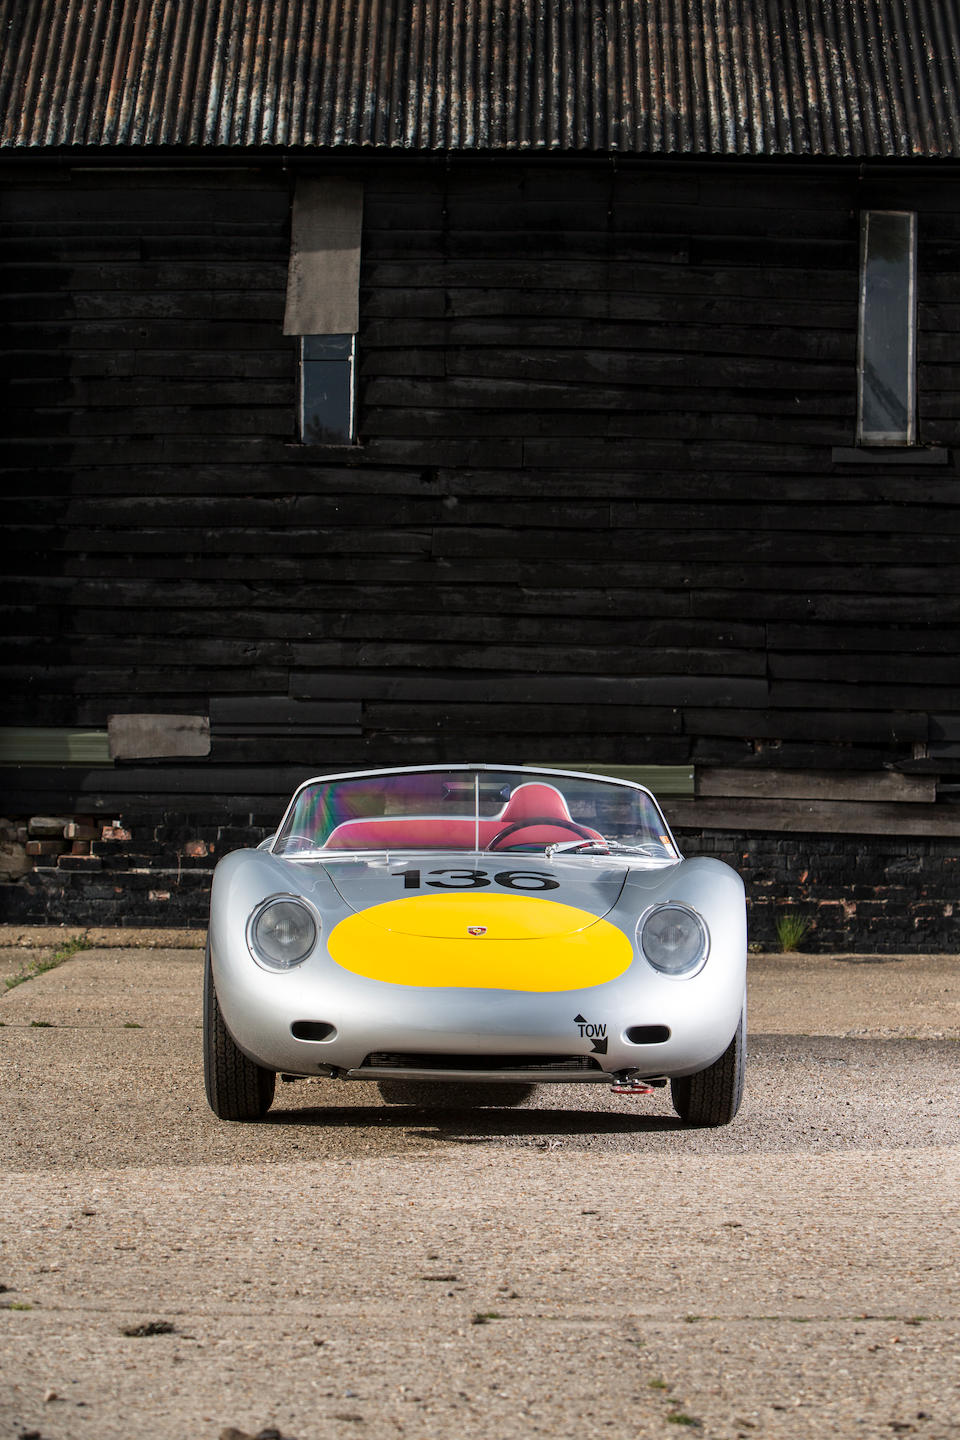 The Property of Sir Stirling Moss OBE The Ex-Bob Holbert, 'Gentleman Tom' Payne, Millard Ripley,1961 Porsche RS-61 Spyder Sports-Racing Two-Seater  Chassis no. 718-070